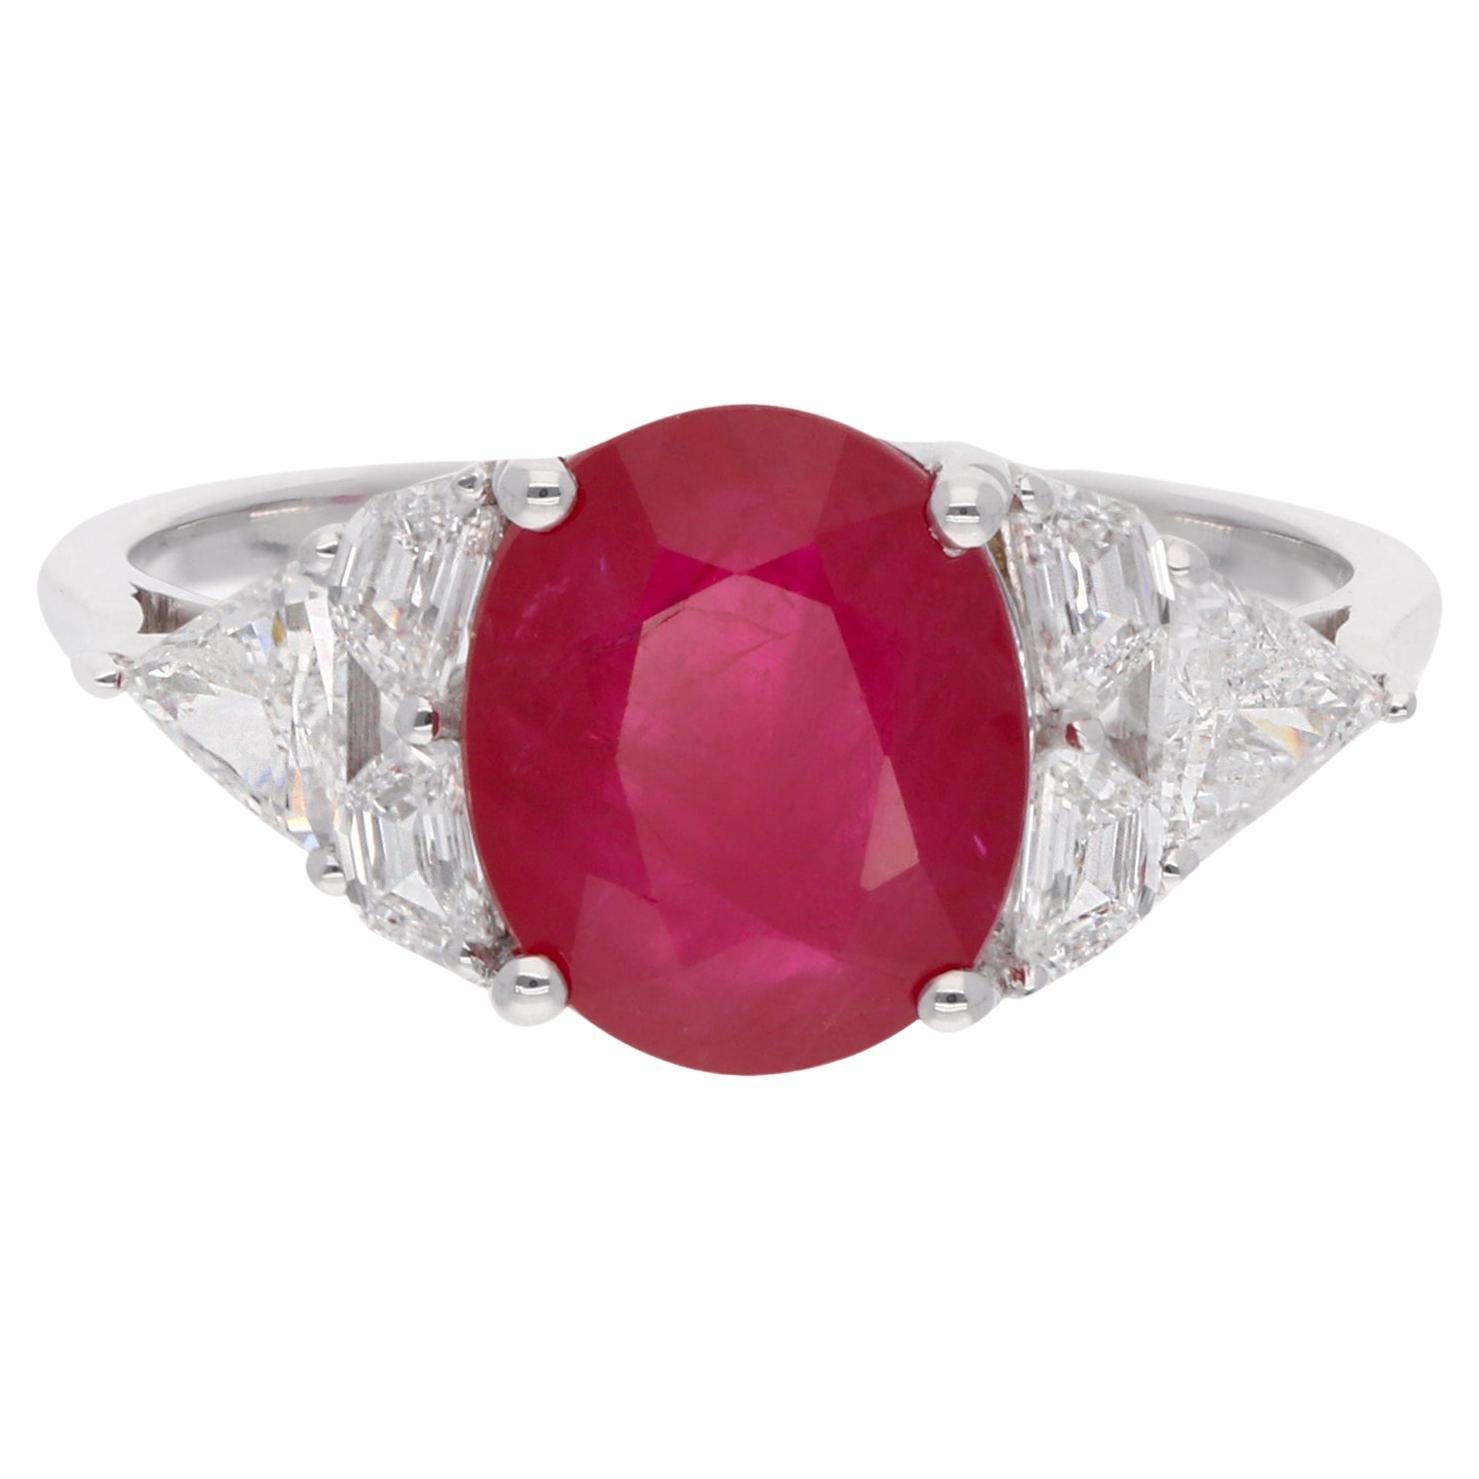 Natural Oval Ruby Gemstone Ring SI Clarity HI Color Diamond 18 Karat White Gold For Sale